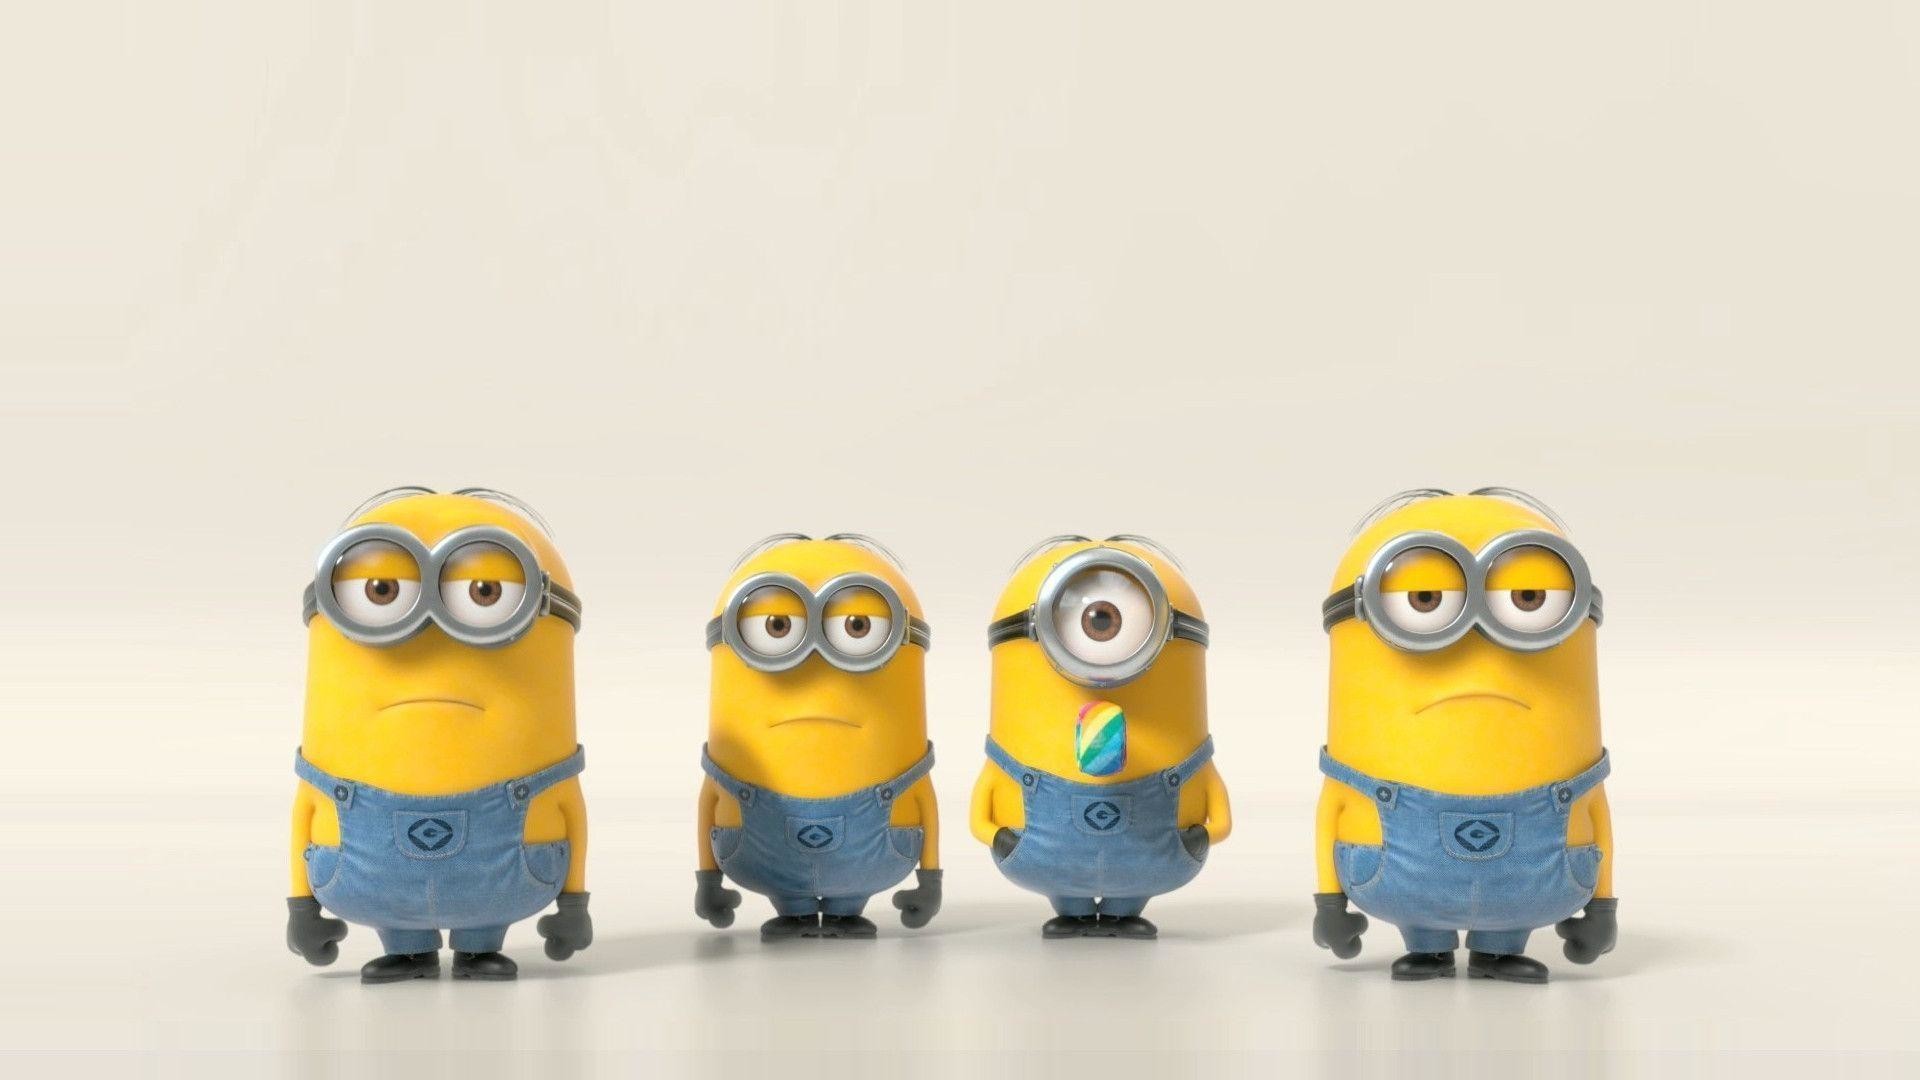 1920x1080 Dispicable Me Minions Mobile Phones Wallpapers Free Download .